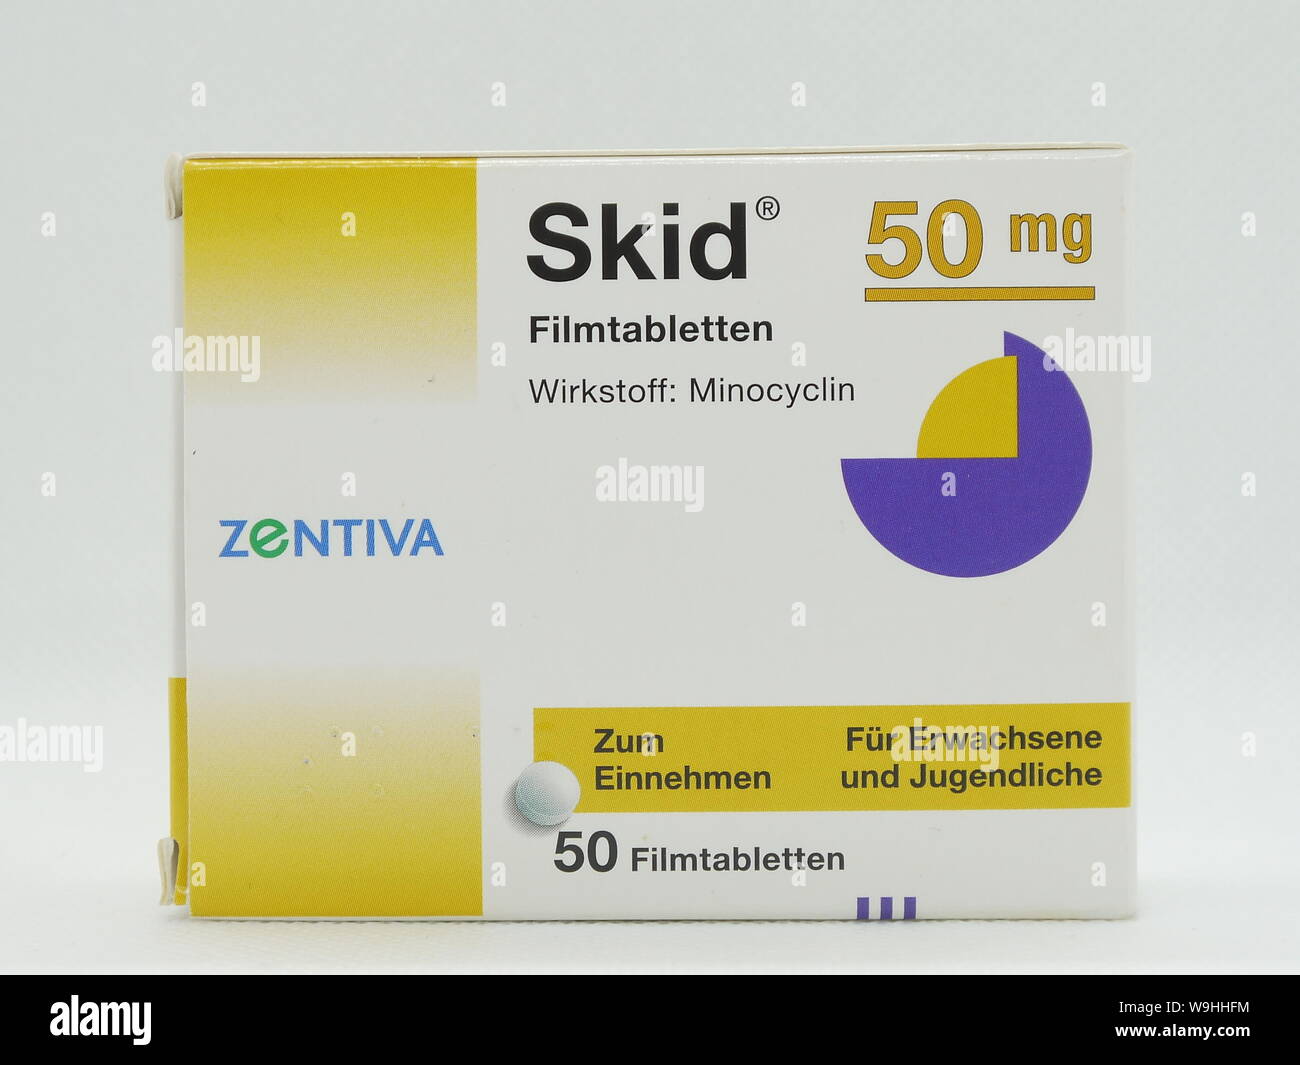 Berlin, Germany - 2019: Skid. Text in german: Pills for adults and Teenager. Stock Photo